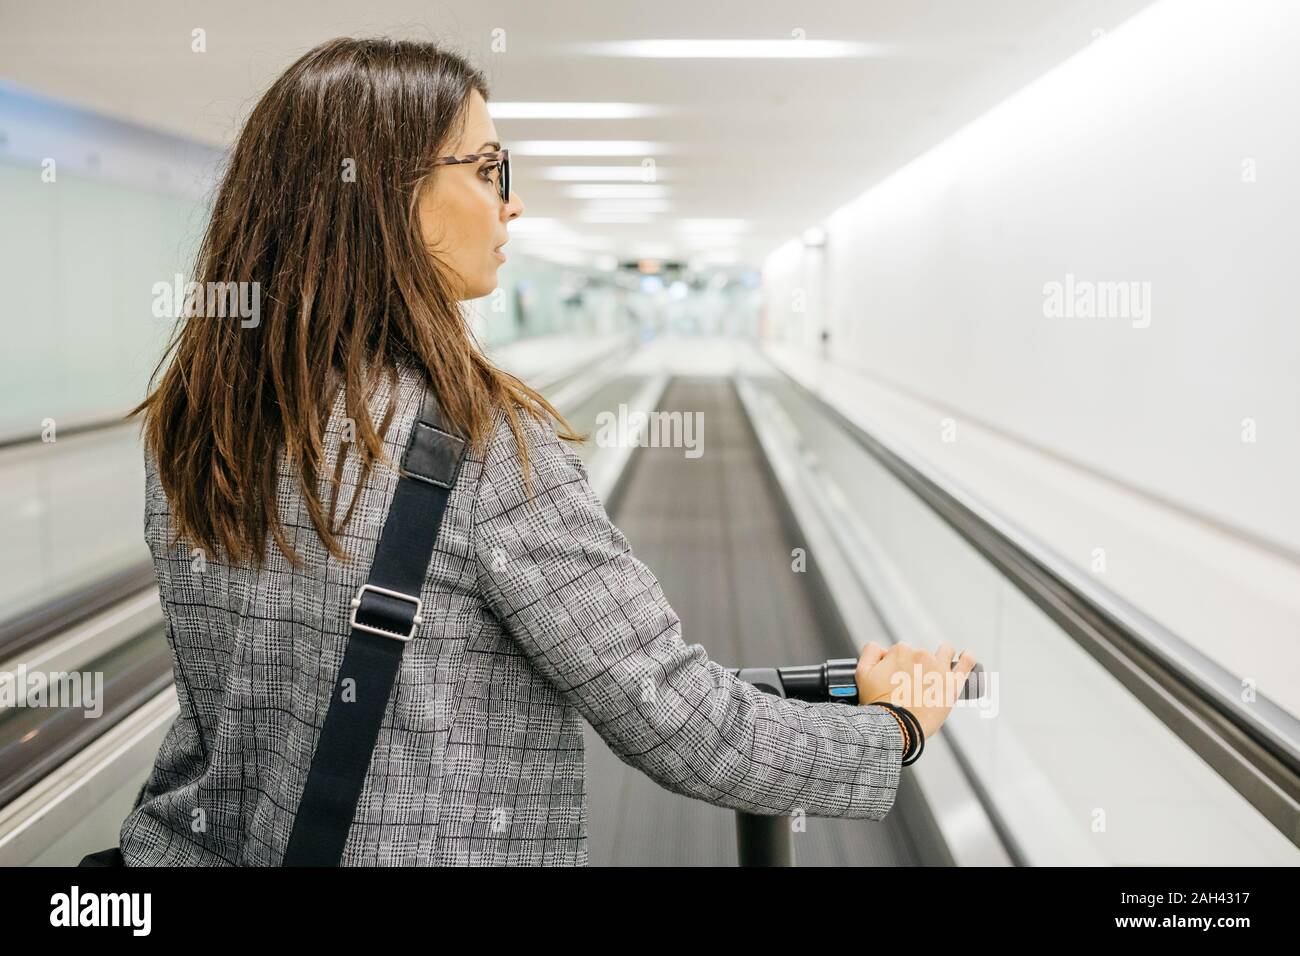 Businesswoman with her electric scooter on moving walkway Stock Photo